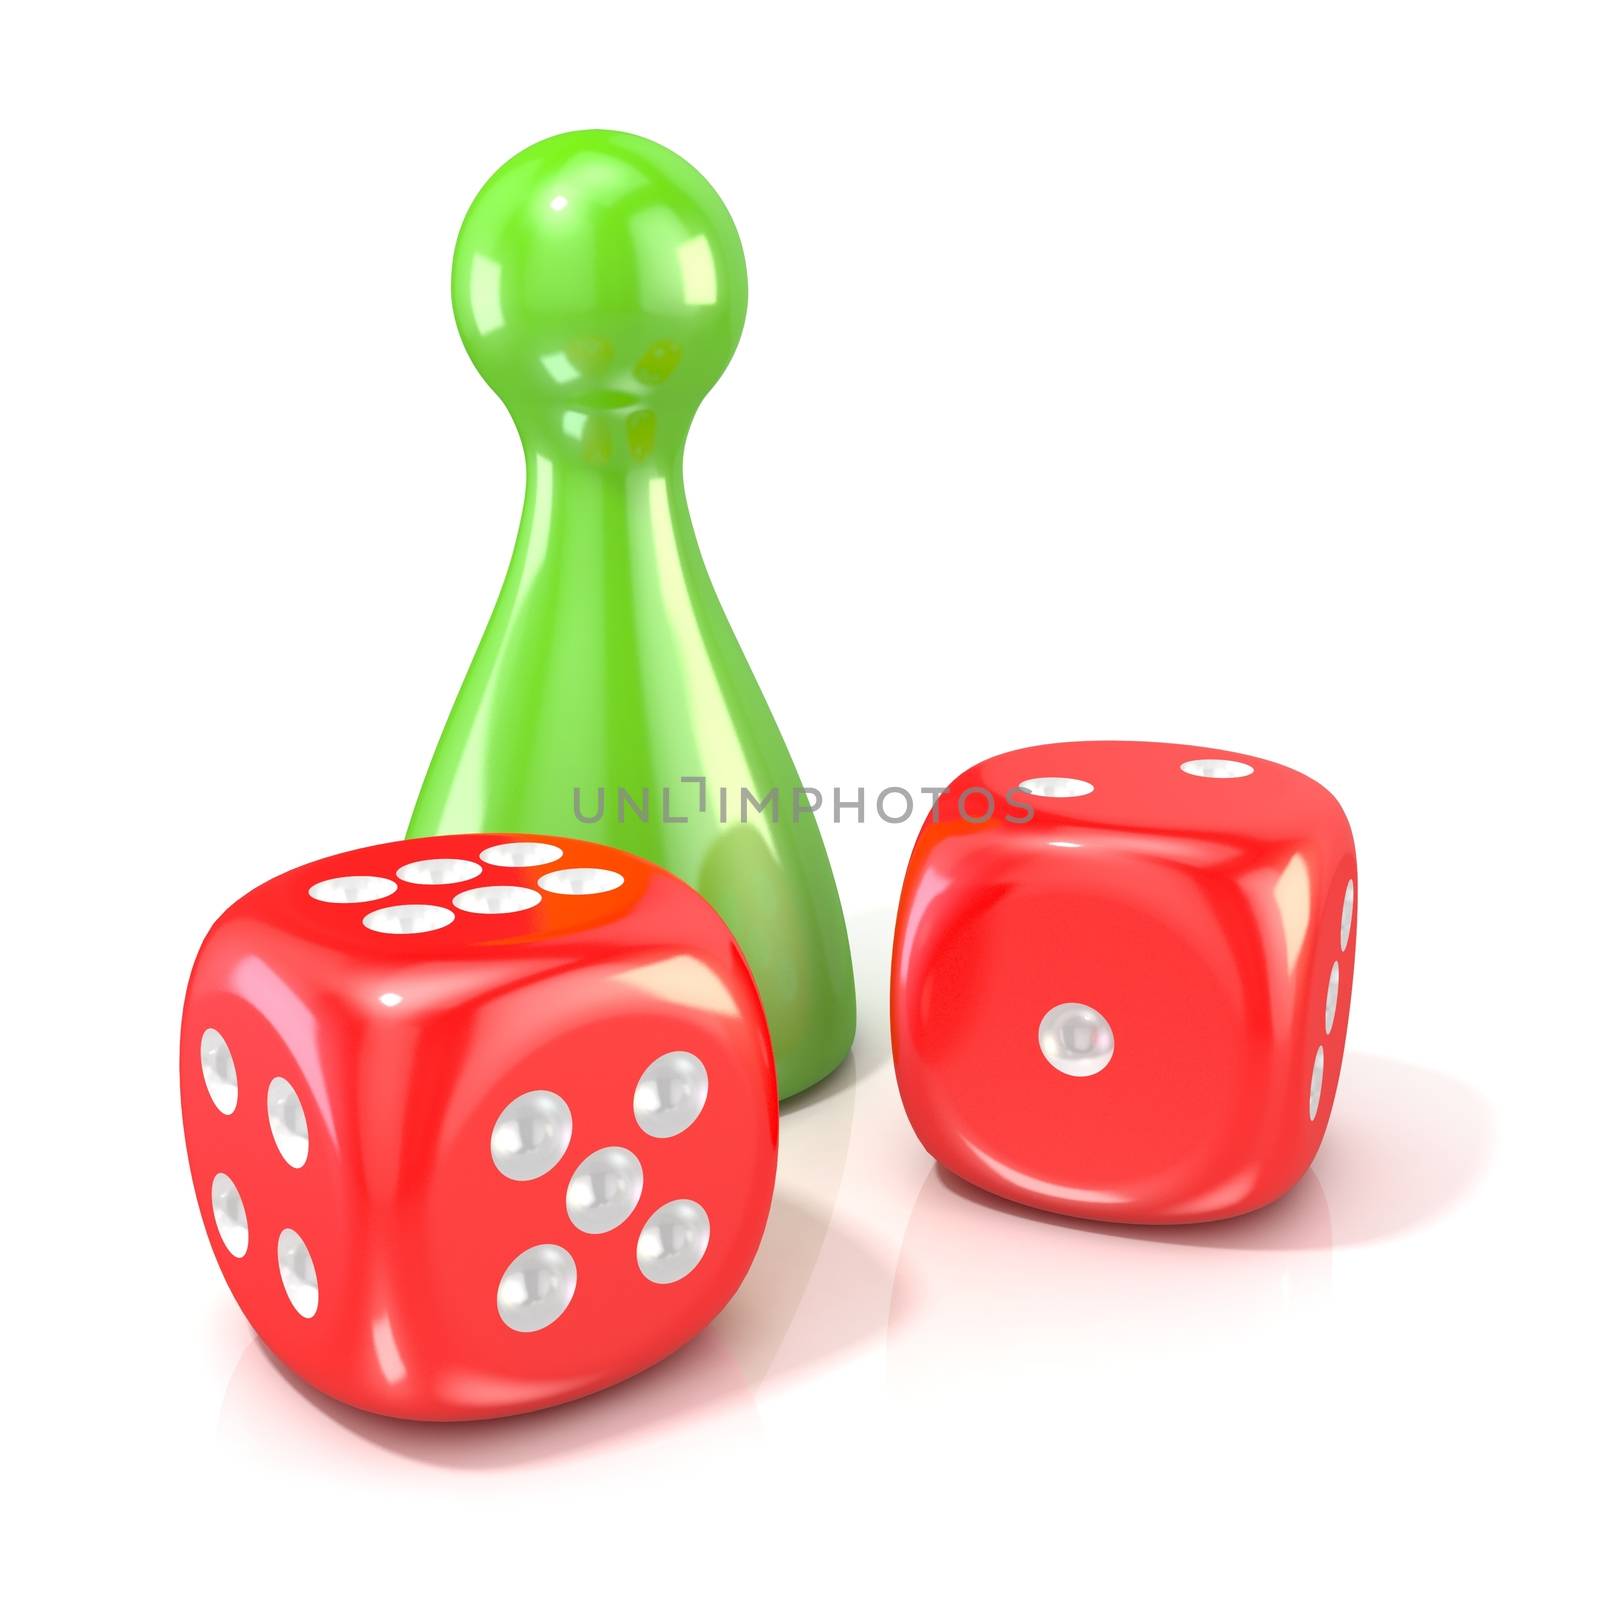 Board game figure with two red dice. 3D render illustration isolated on white background